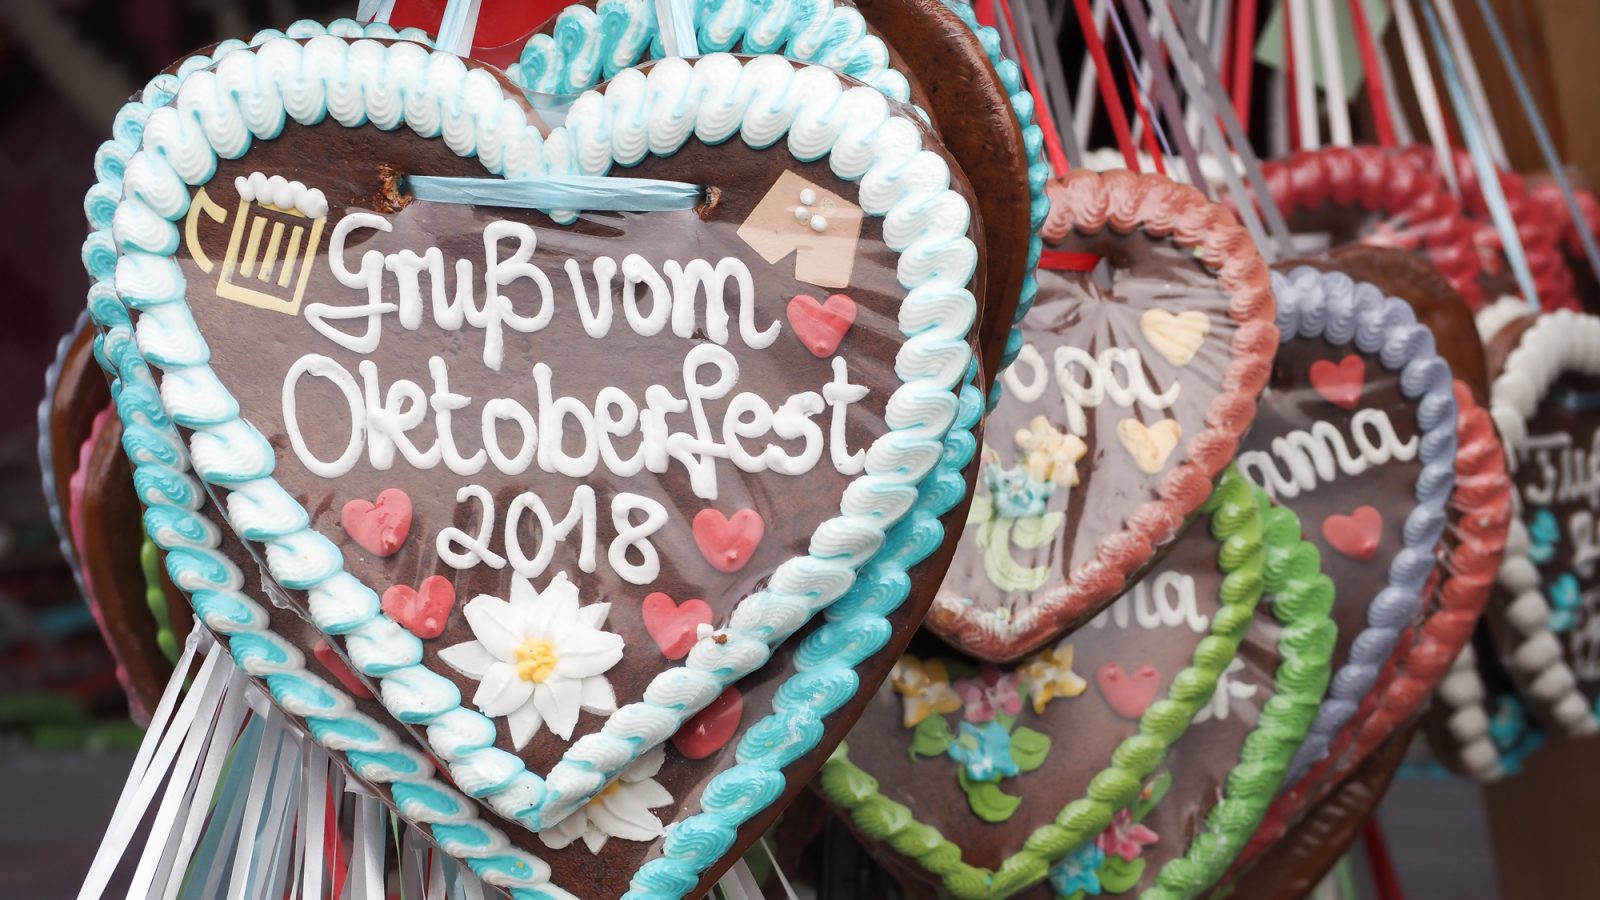 An Oktoberfest Tour Guide's Most Frequently Asked Oktoberfest Questions | Munich, Germany #traveltips #oktoberfest #munich #germany #festival #beer